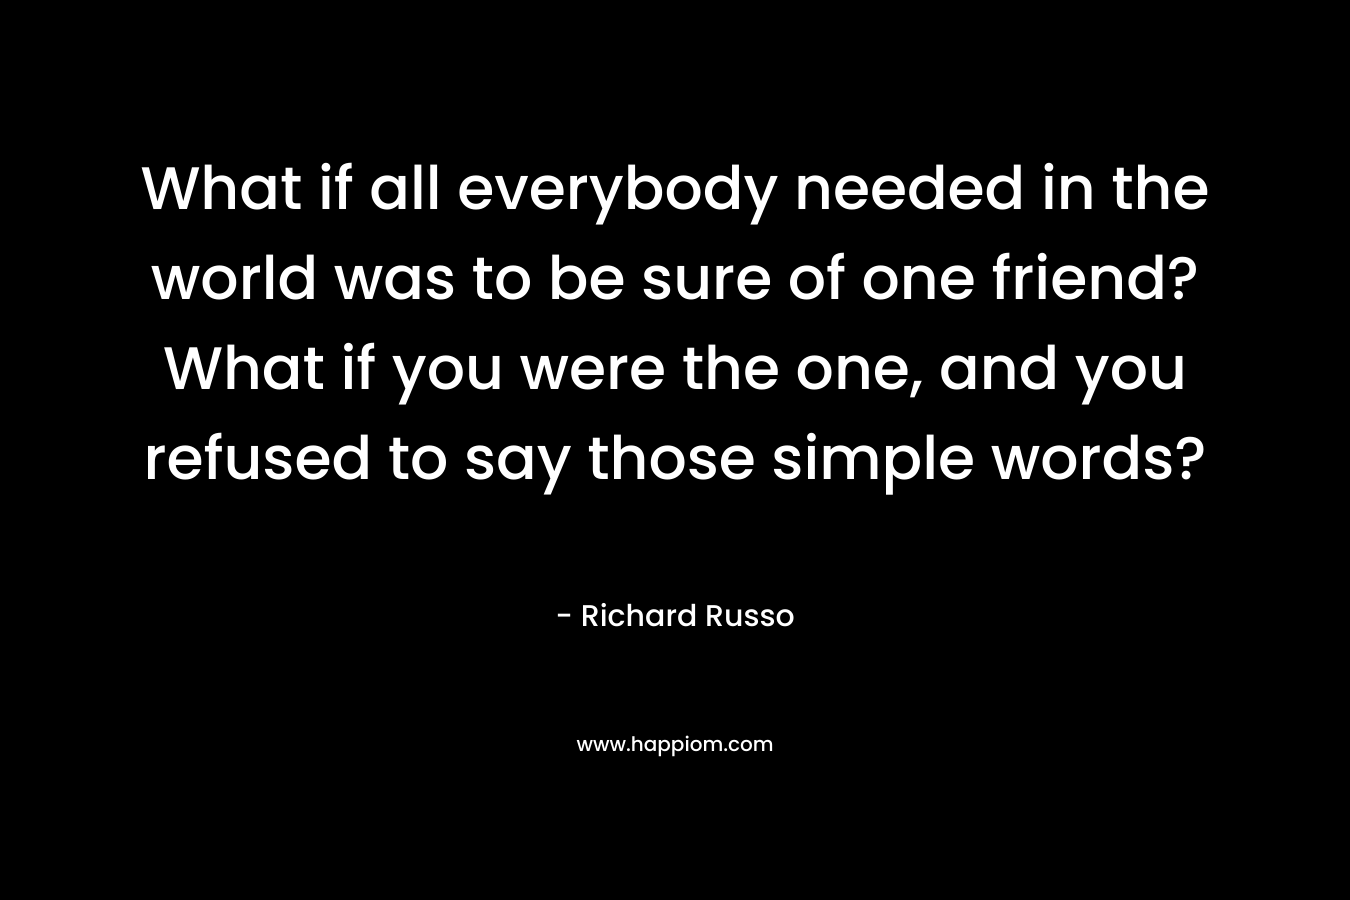 What if all everybody needed in the world was to be sure of one friend? What if you were the one, and you refused to say those simple words?